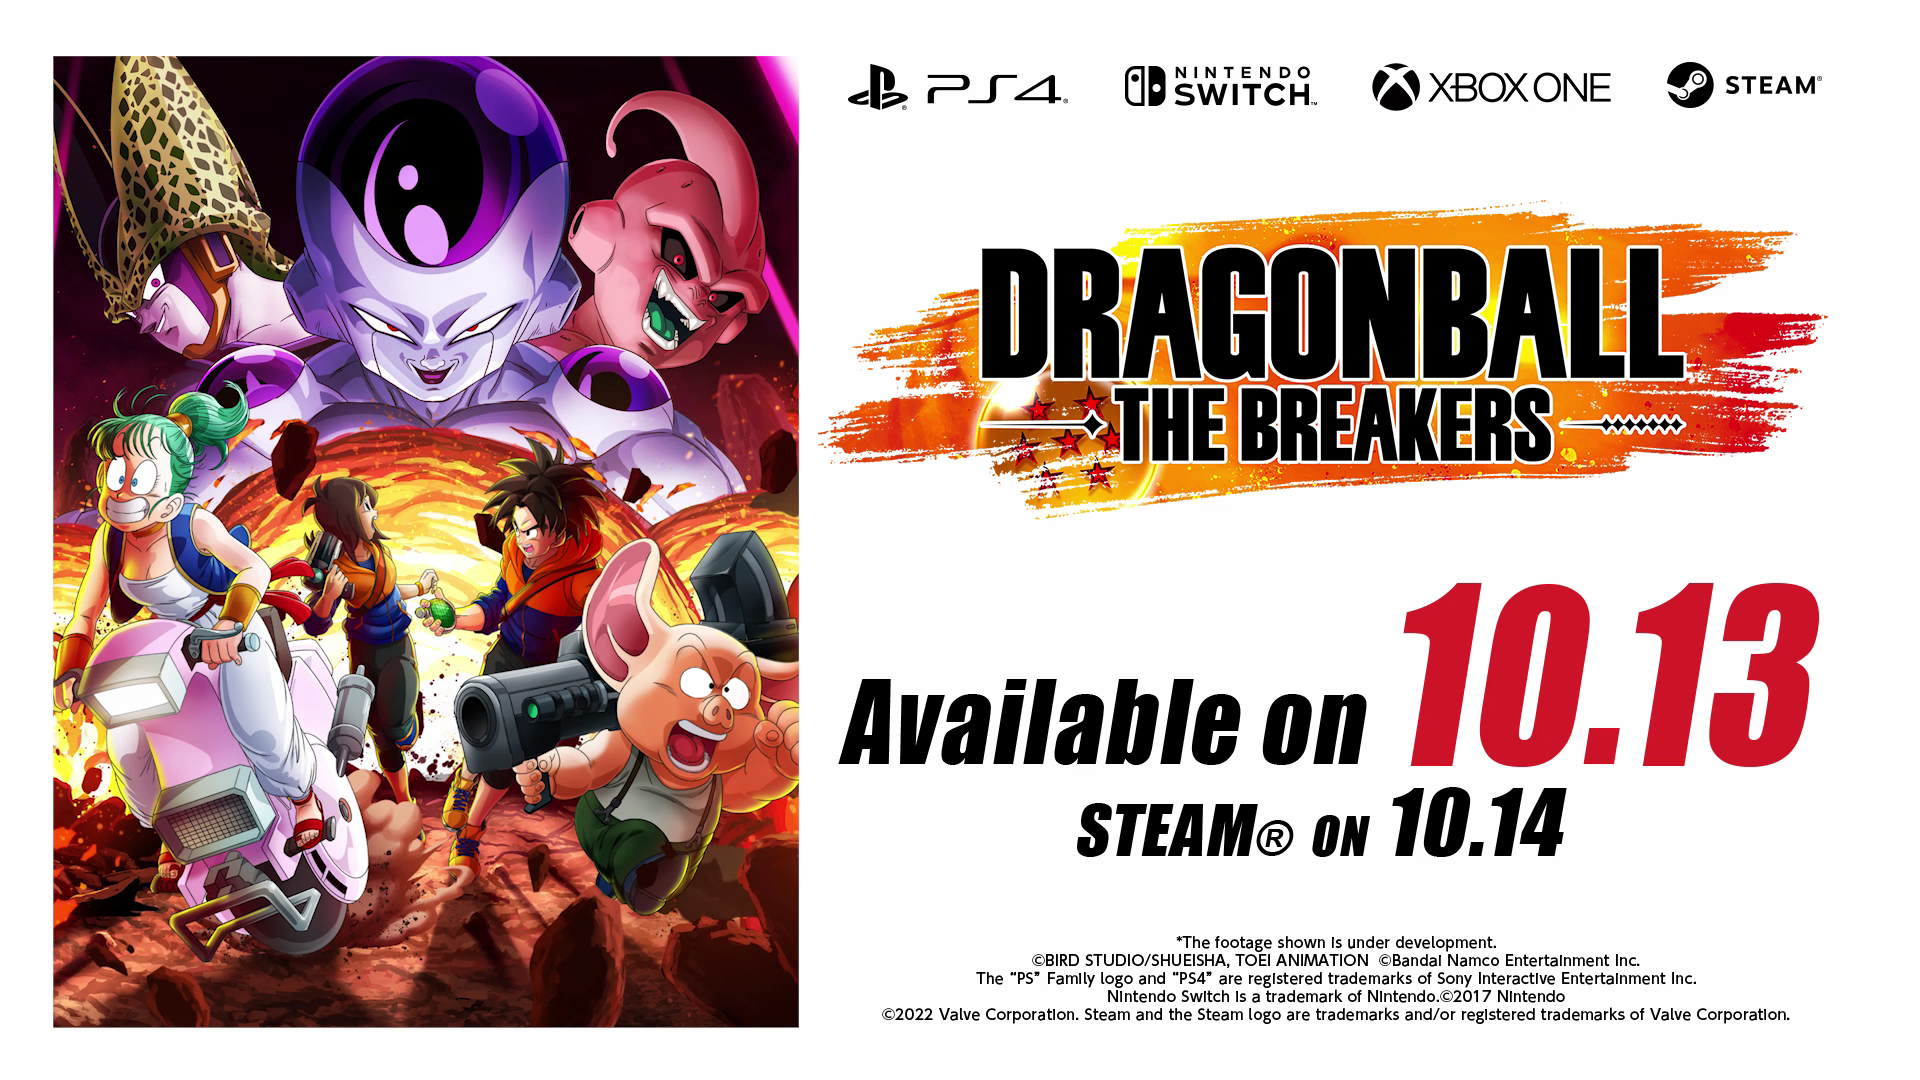 Buy Dragon Ball: The Breakers Steam